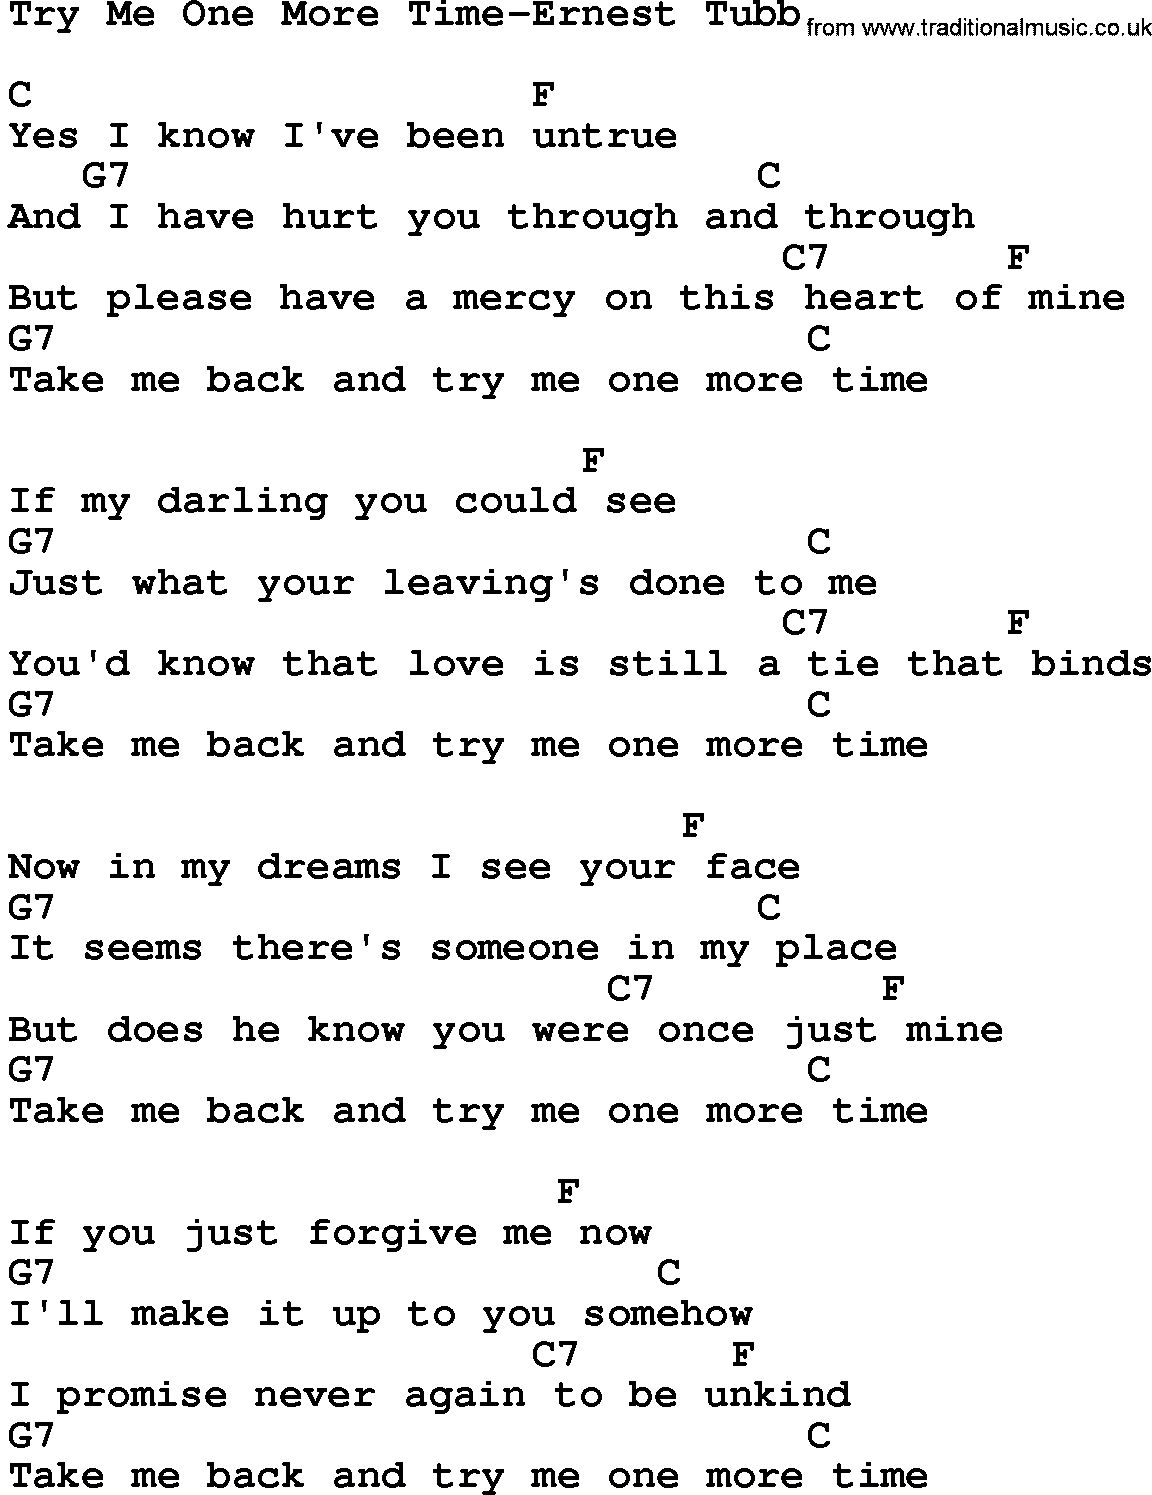 Country music song: Try Me One More Time-Ernest Tubb lyrics and chords